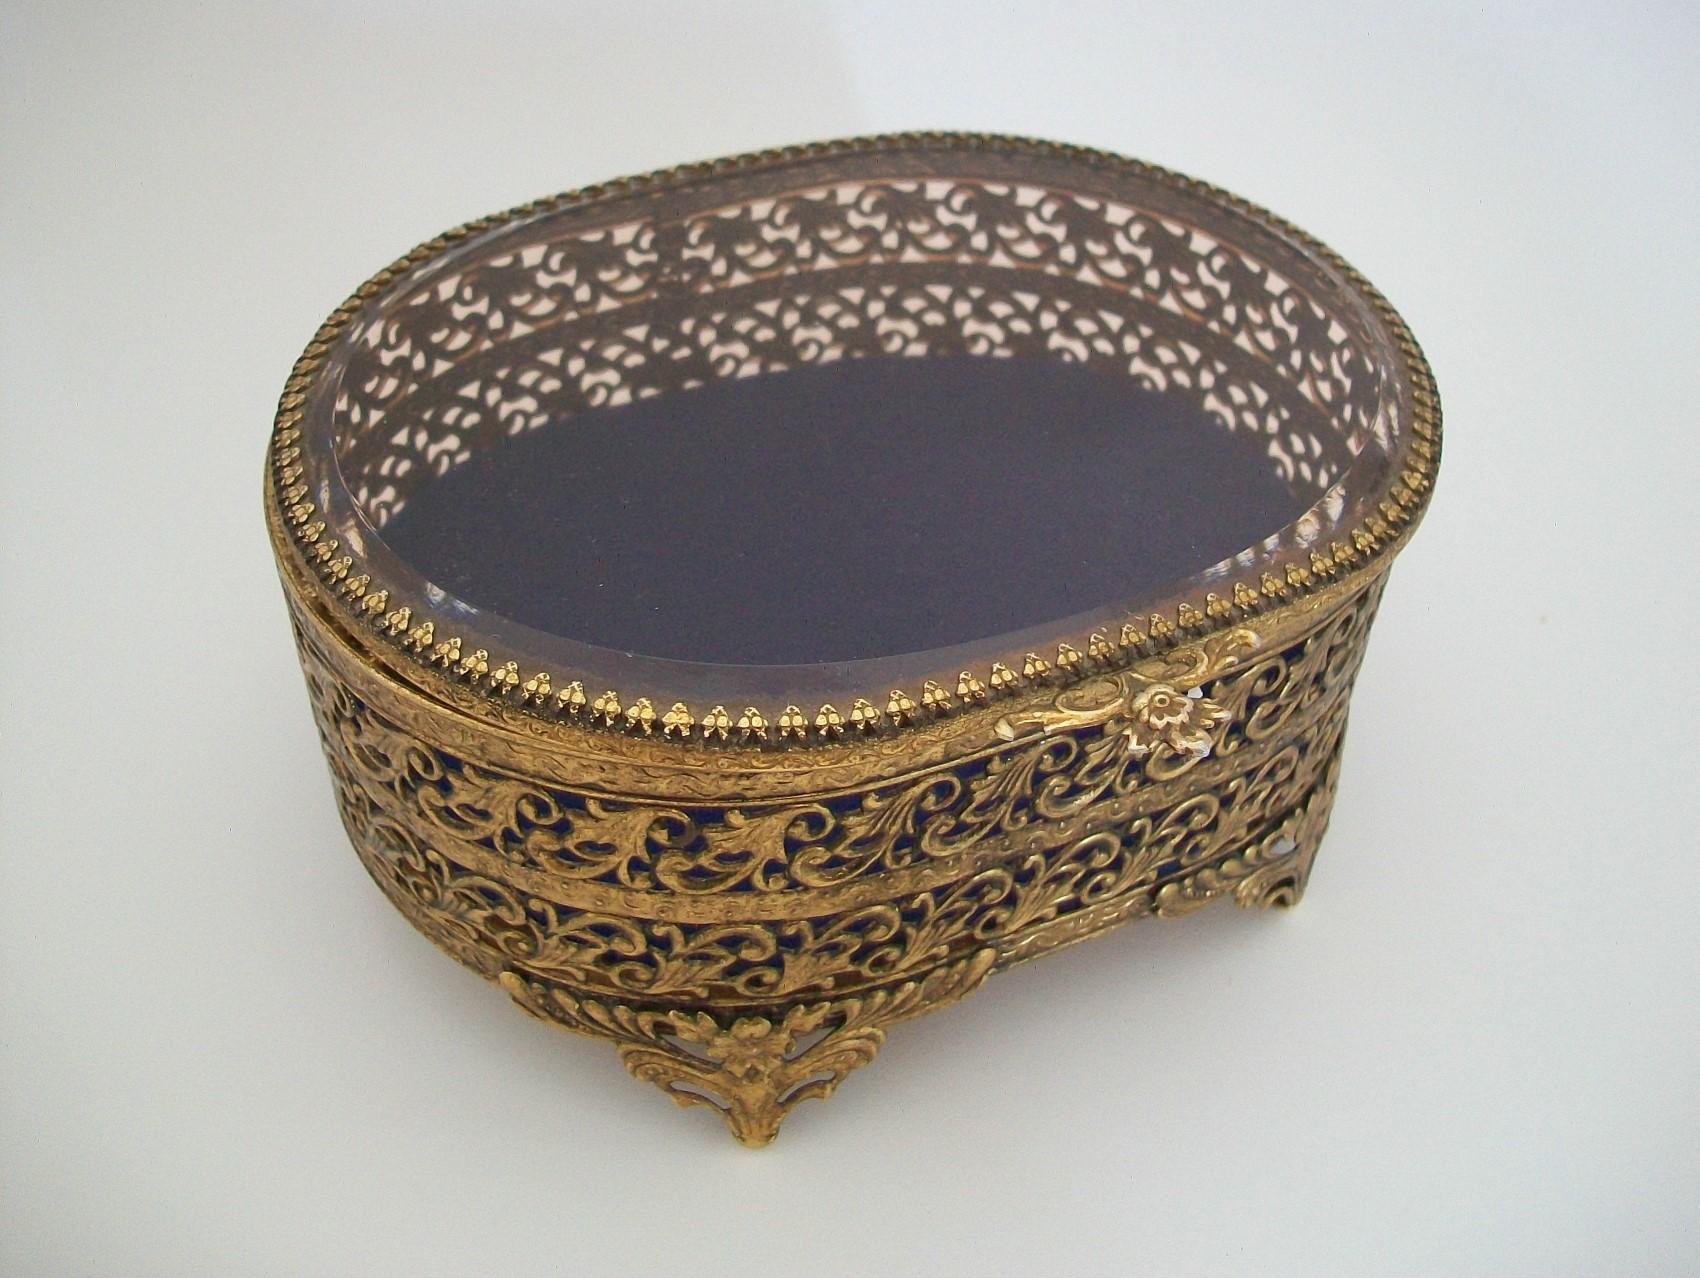 Hollywood Regency brass filigree and smoky topaz glass jewelry box with hinged lid - featuring scrolls and bands to the brass sides - beveled edge to the glass top - floral thumb piece and bracket feet - royal blue felt liner - unsigned - France